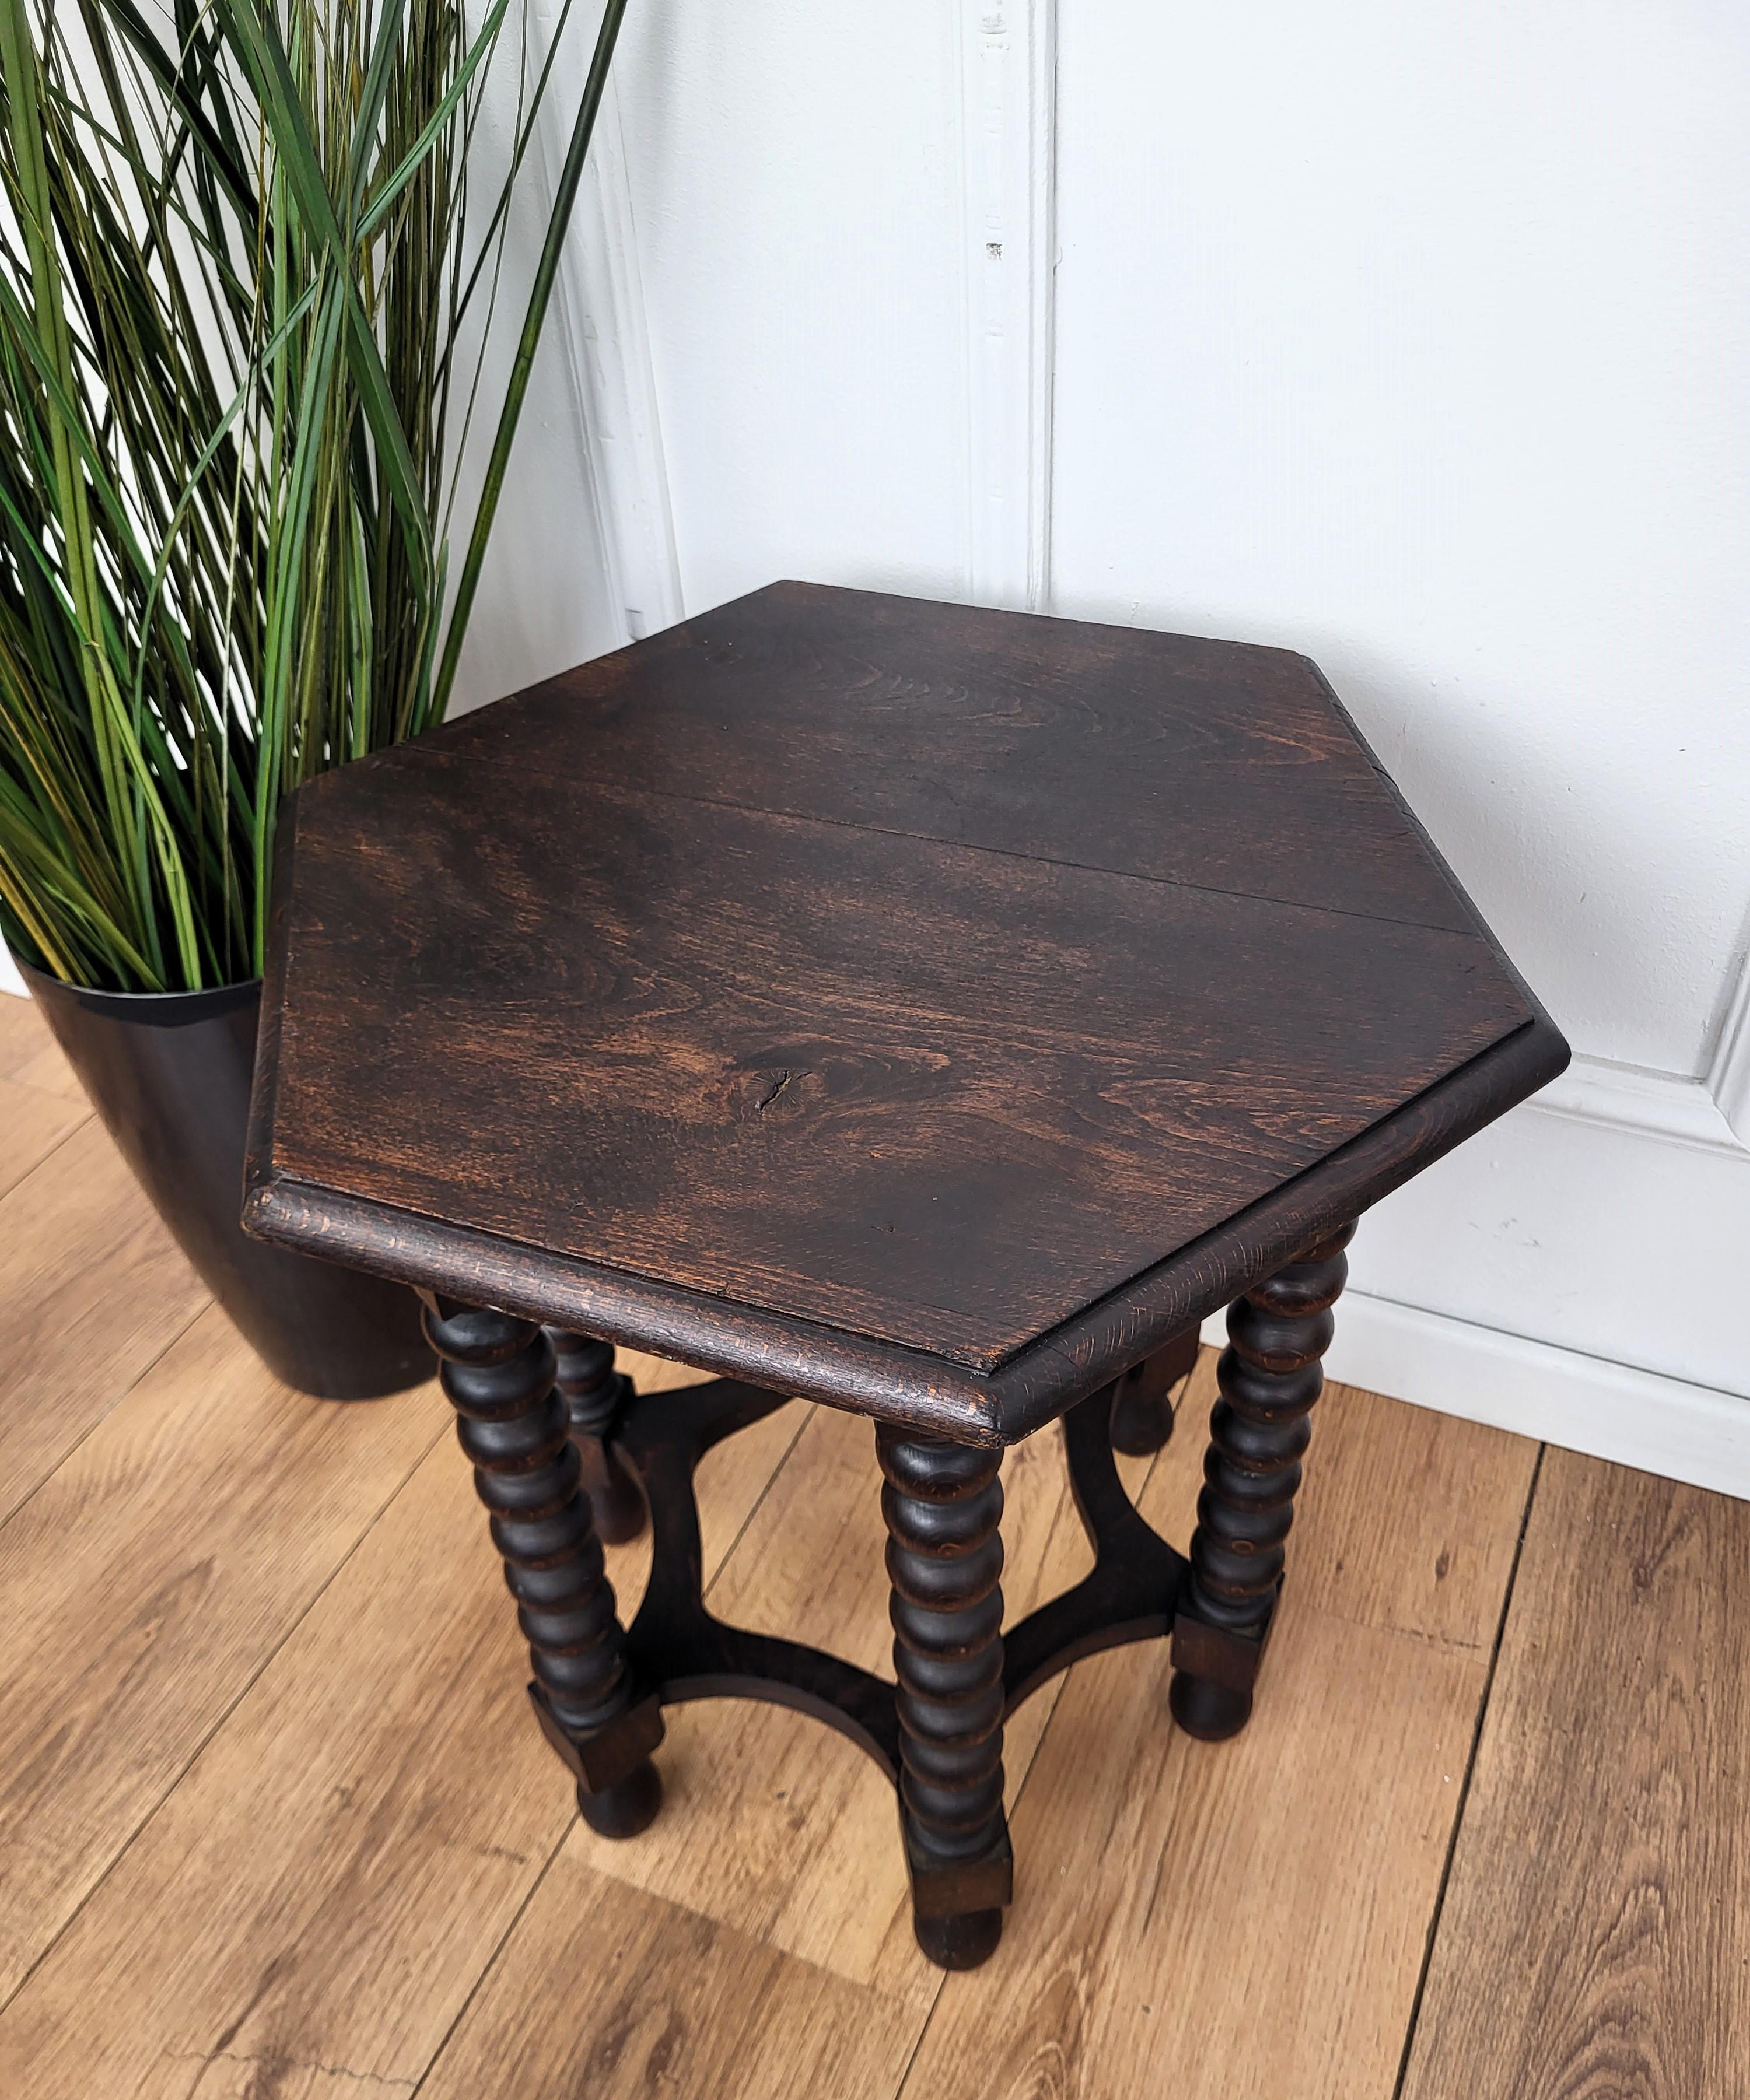 Antique Italian Hexagonal Black Walnut Side Table Stool with Bobbin Turned Legs In Good Condition For Sale In Carimate, Como